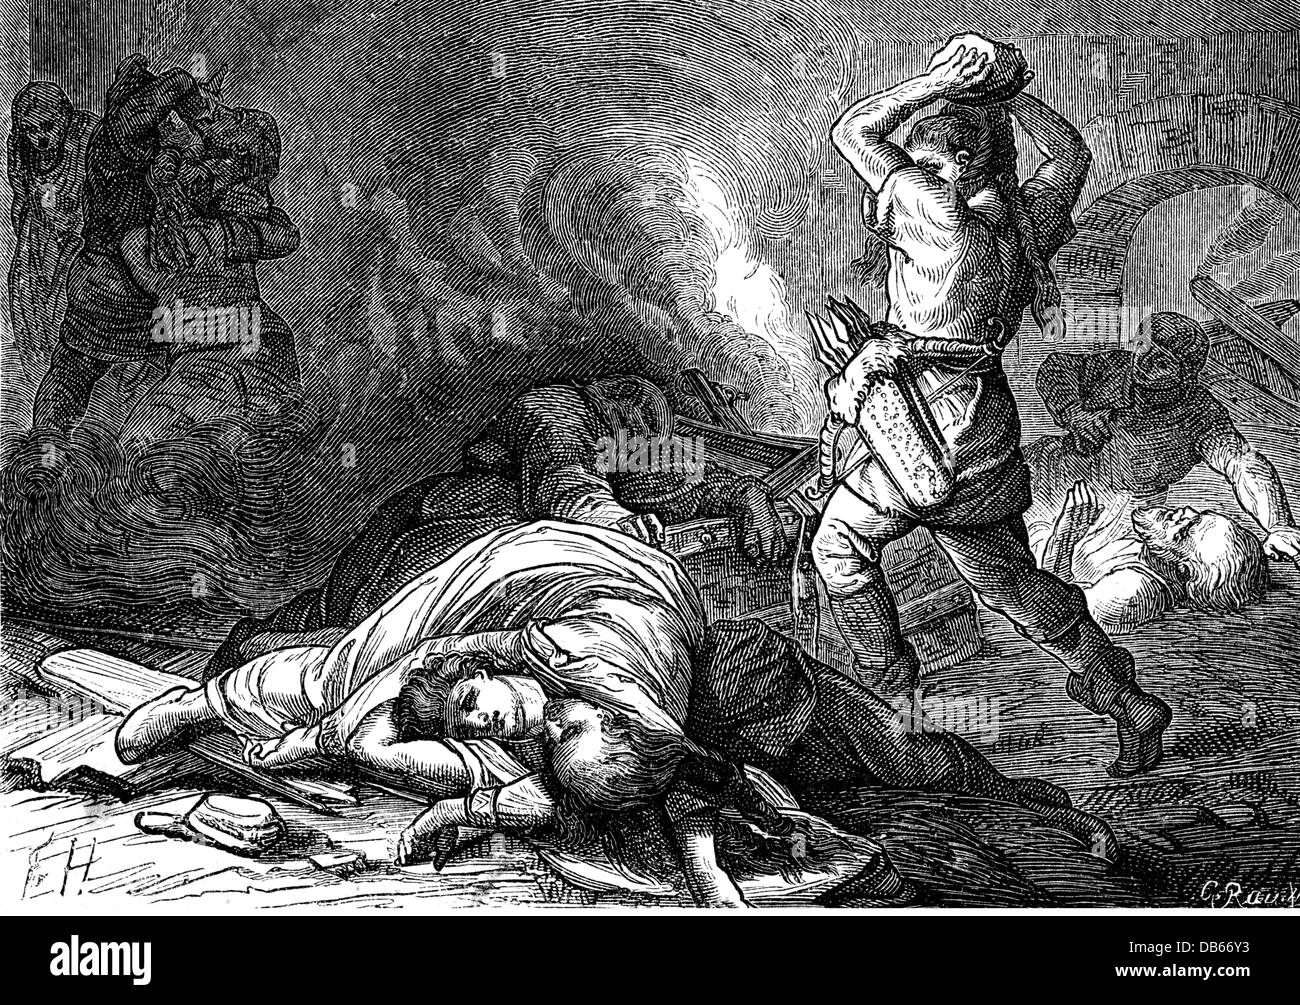 Middle Ages, campaigns of King Henry I against the Slavs (East Francia), 928 / 929, Redarii capture the castle of Walsleben and kill all inhabitants, 929, wood engraving after drawing by Friedrich Hottenroth, 19th century, uprising, rising, uprisings, Henry, 10th century, violence, slay, slaying, kill, killing, dead body, dead bodies, corpse, corpses, dead, death, conquest, conquests, war, wars, campaign, campaigns, historic, historical, medieval, people, Additional-Rights-Clearences-Not Available Stock Photo